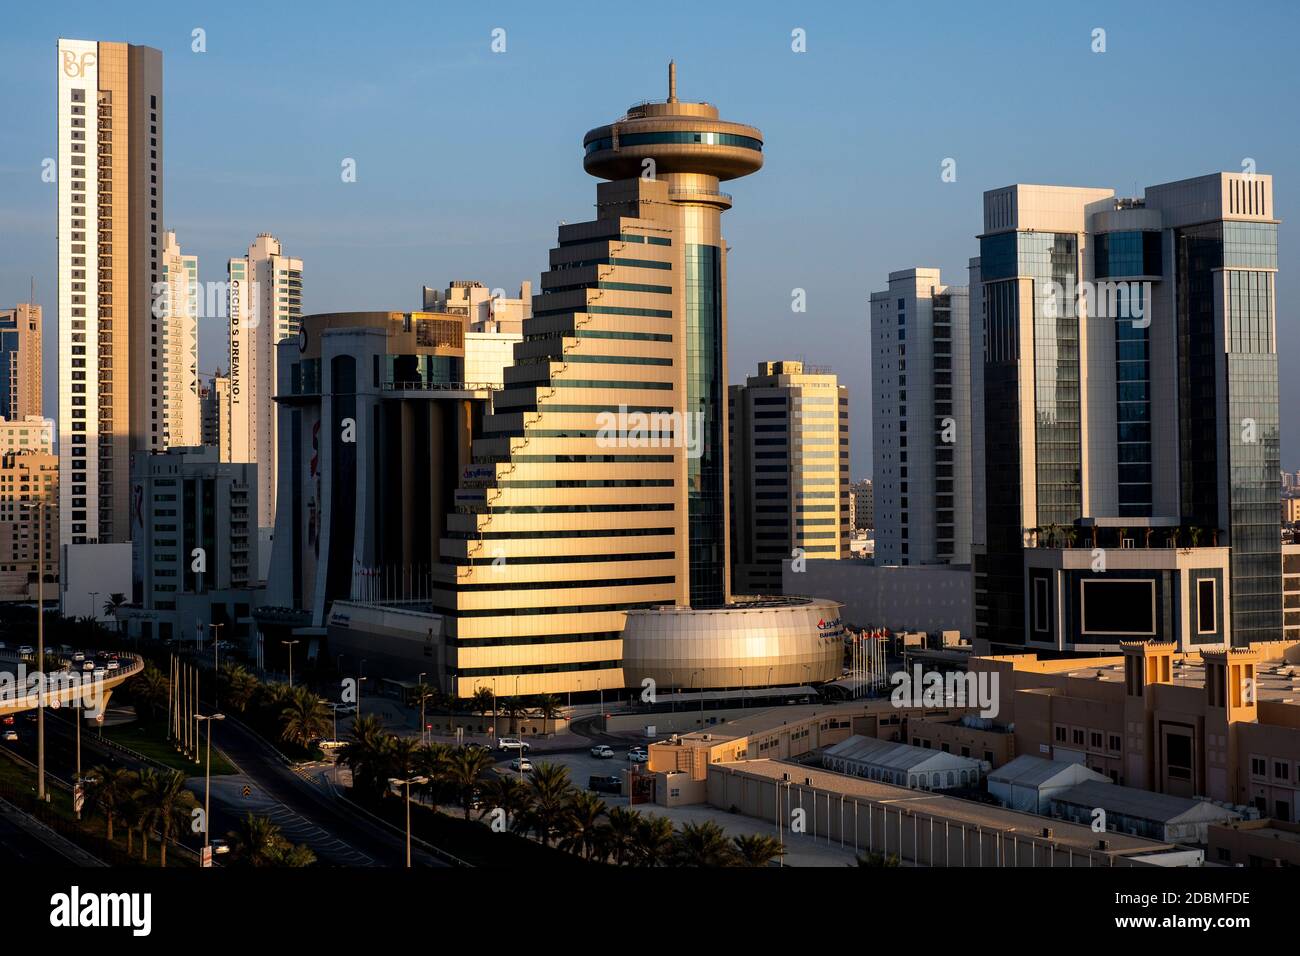 Bahrain Chamber of Commerce and Industry (BCCI) in Manama, Bahrain at sunset Stock Photo